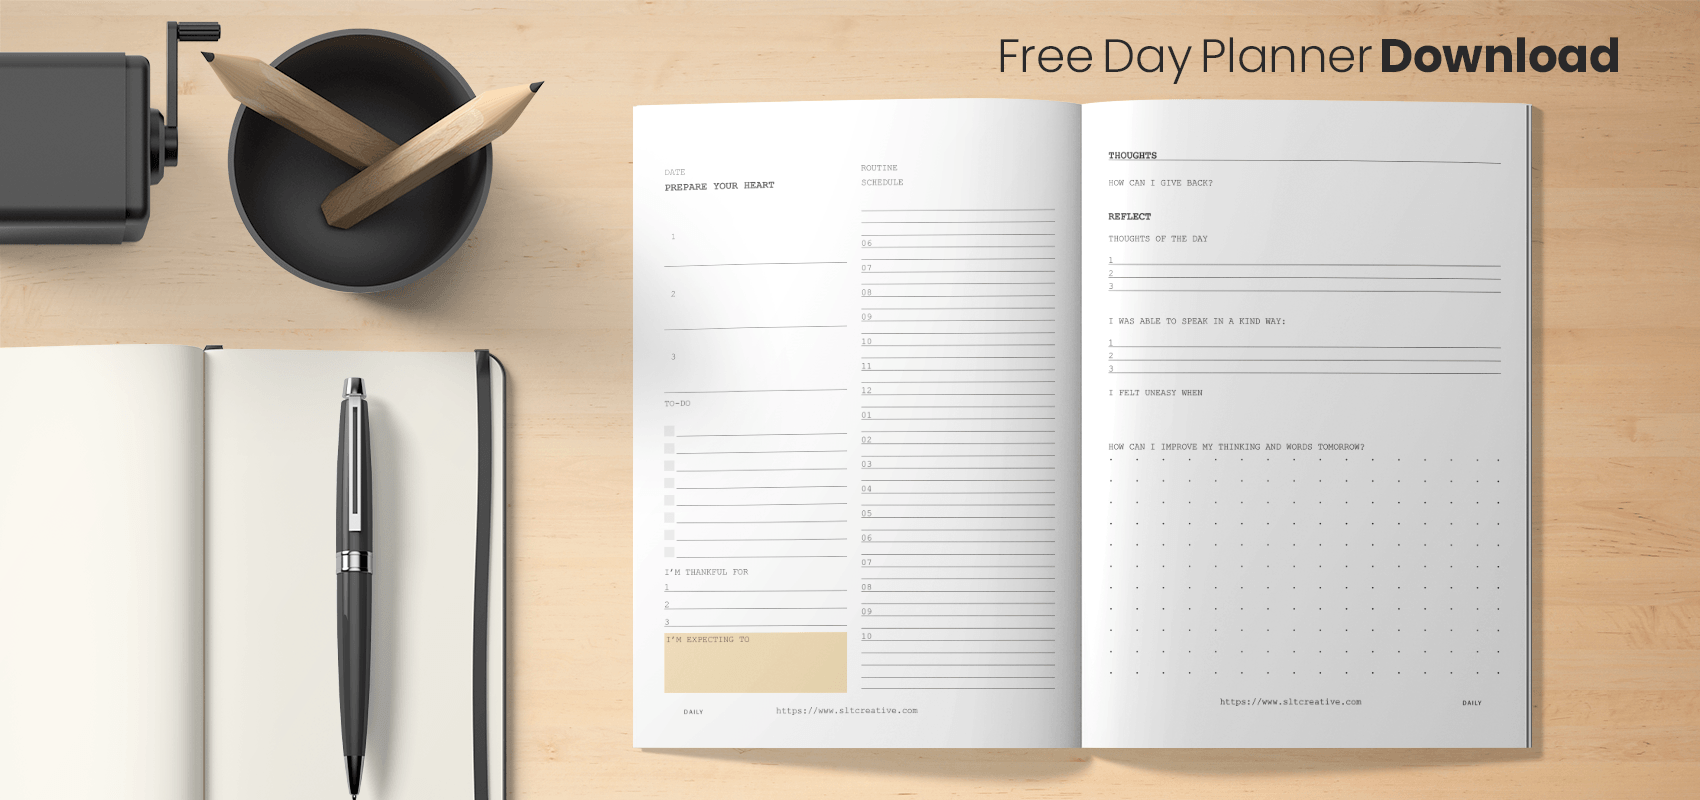 Printable Day Planner